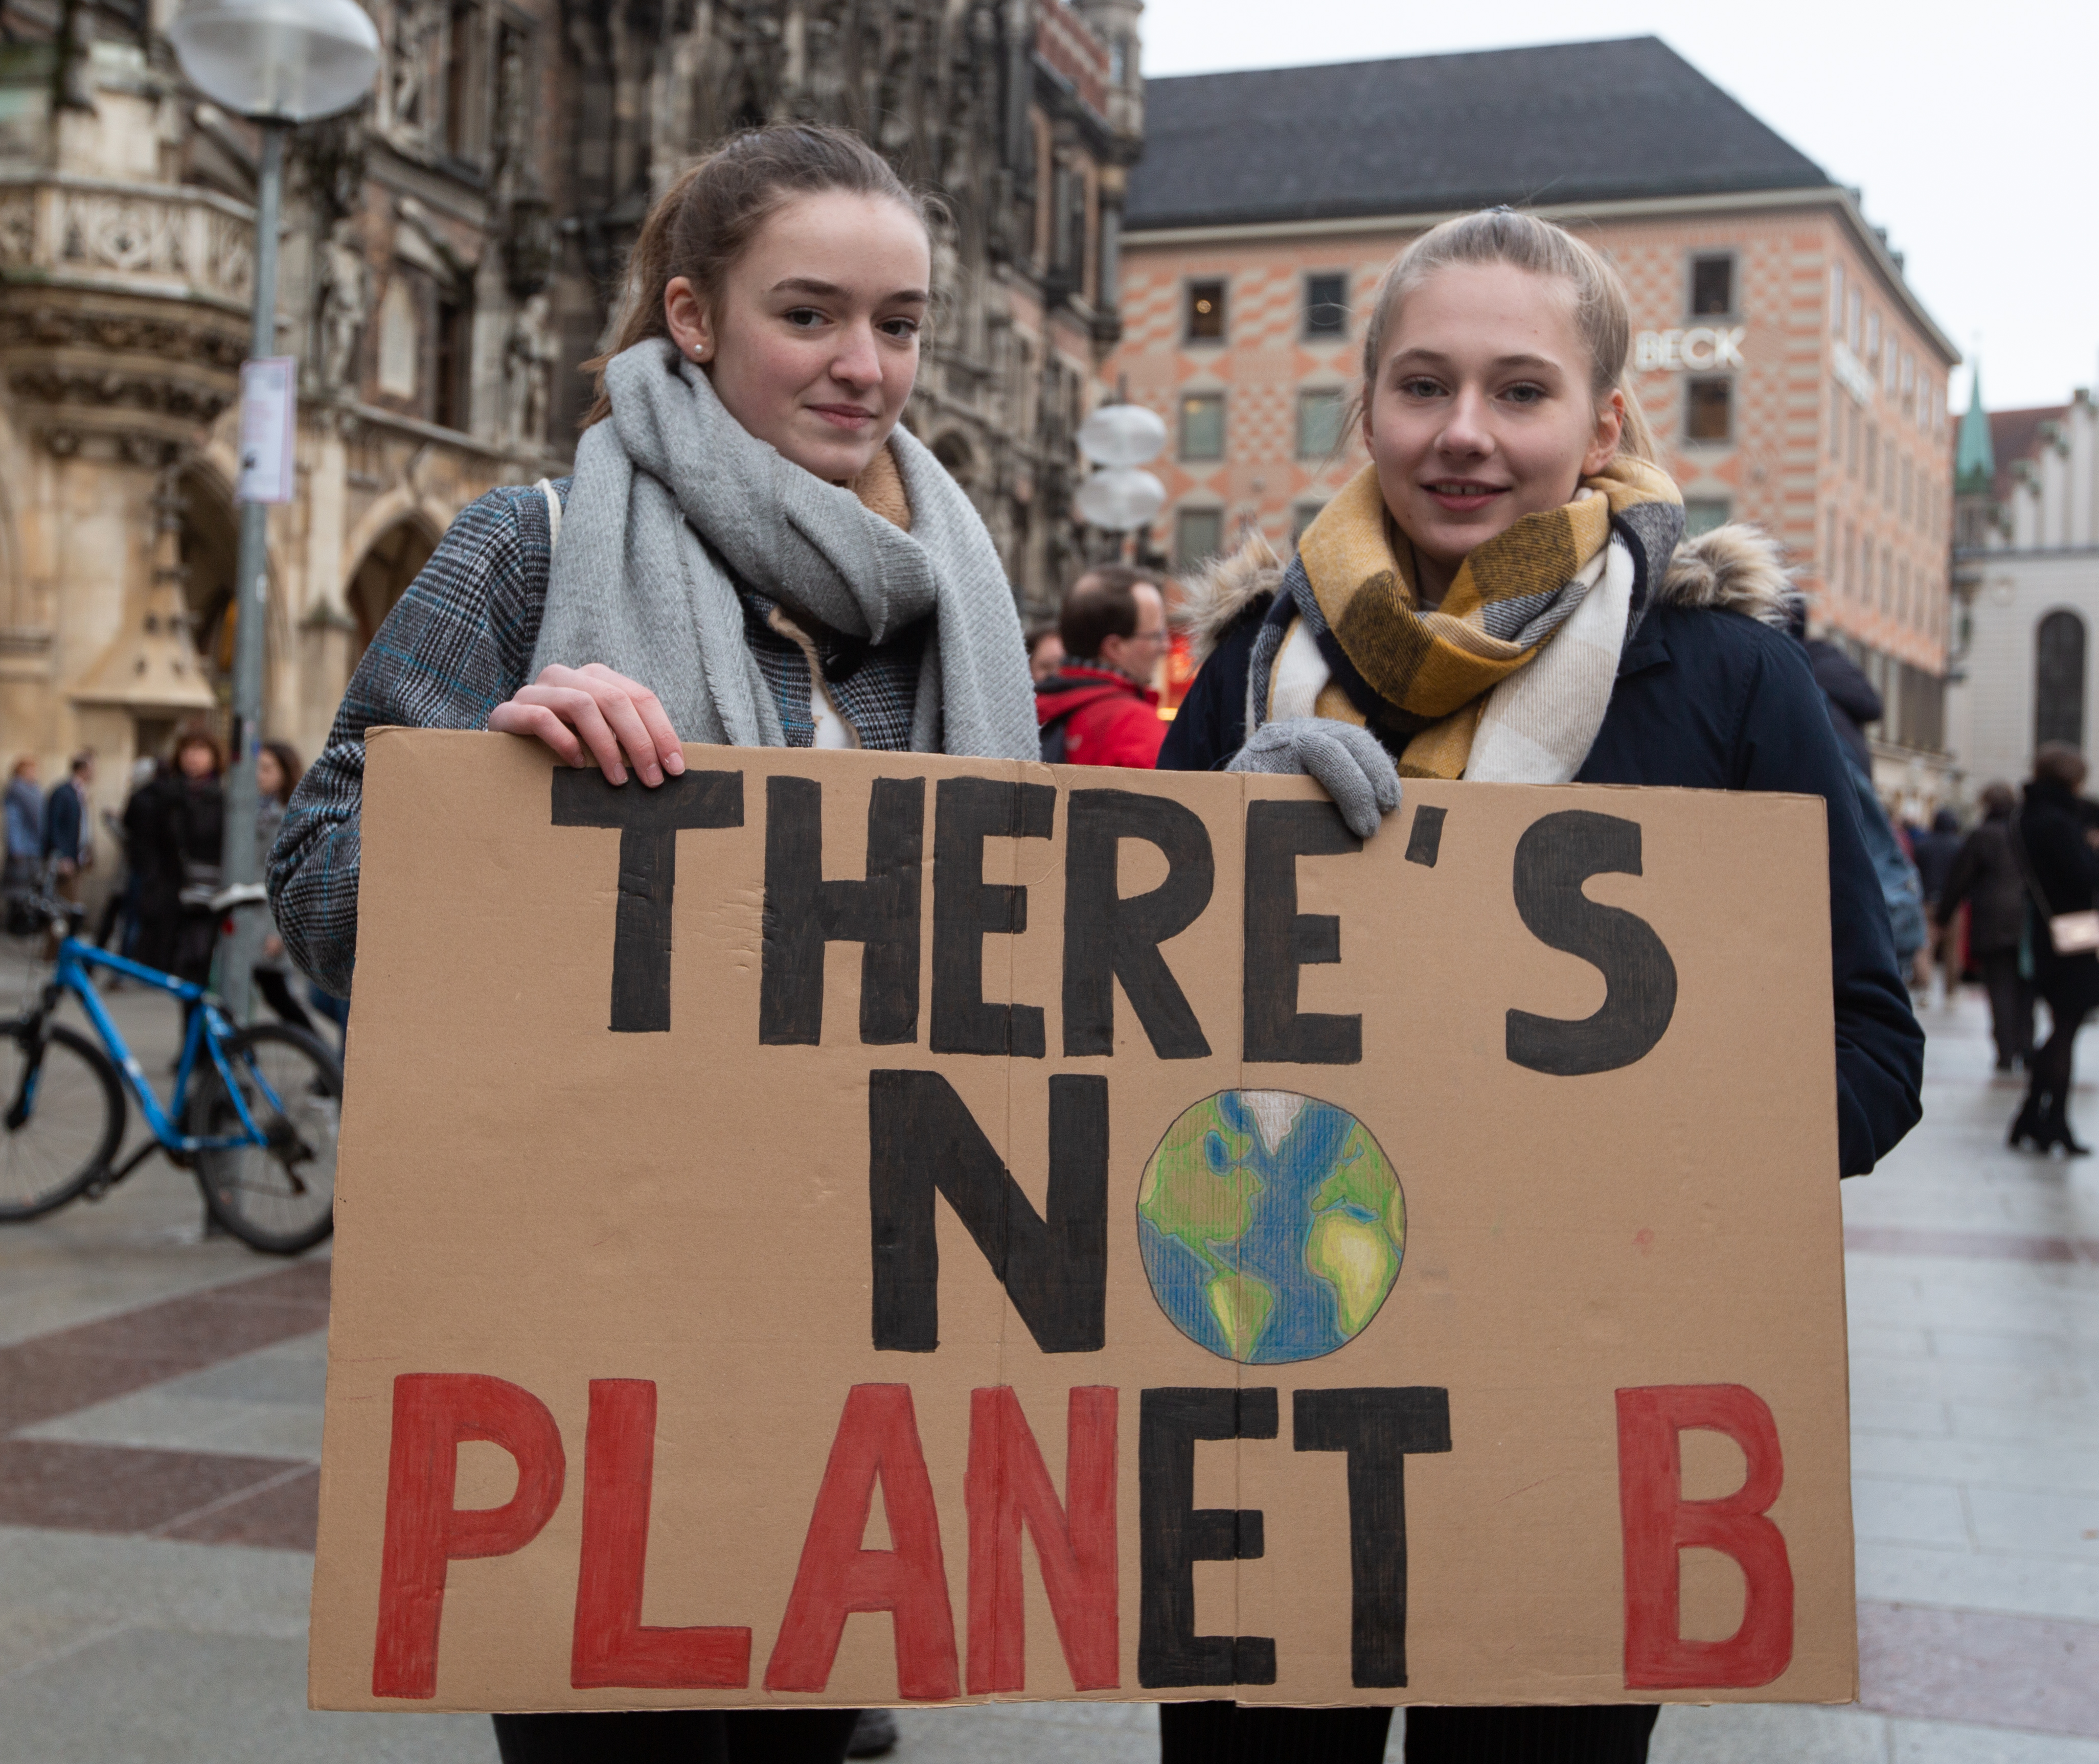 Protestors hold up a sign reading "There is no Planet B" in Munich, Germany on Feb. 2, 2019. (Alexander Pohl&mdash;NurPhoto/Getty Images)